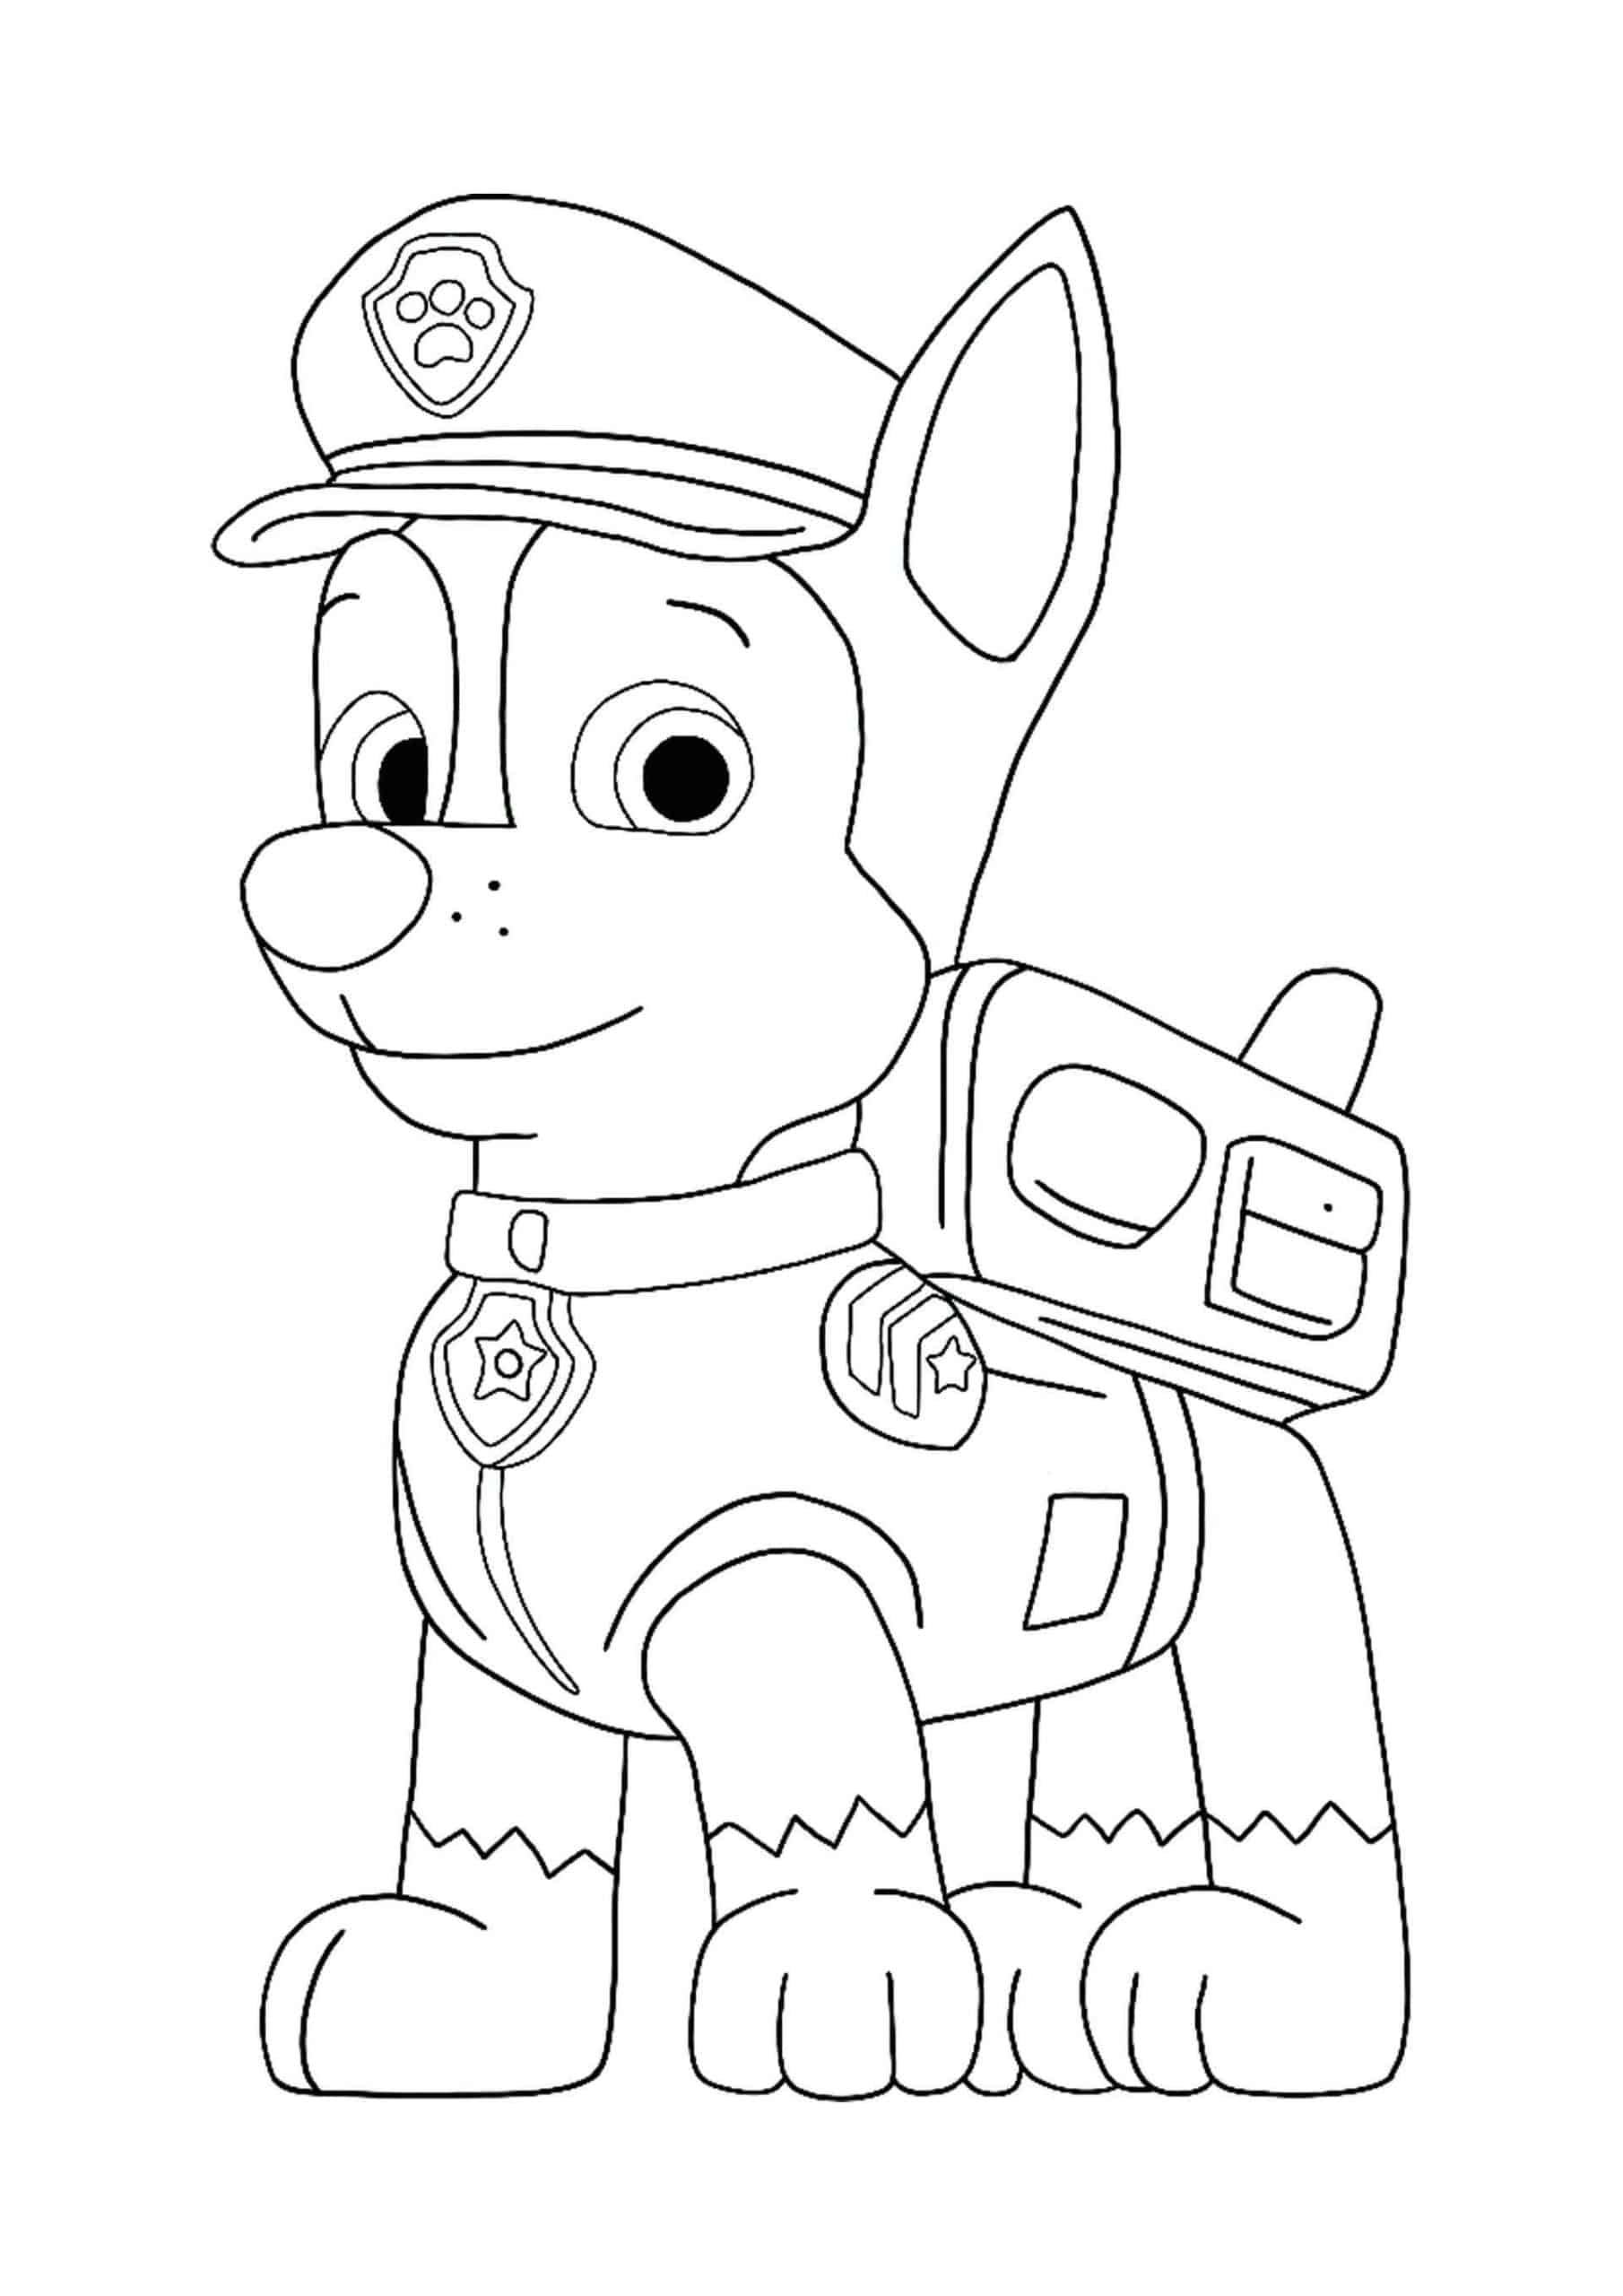 Chase Paw Patrol Coloring Pages To Print